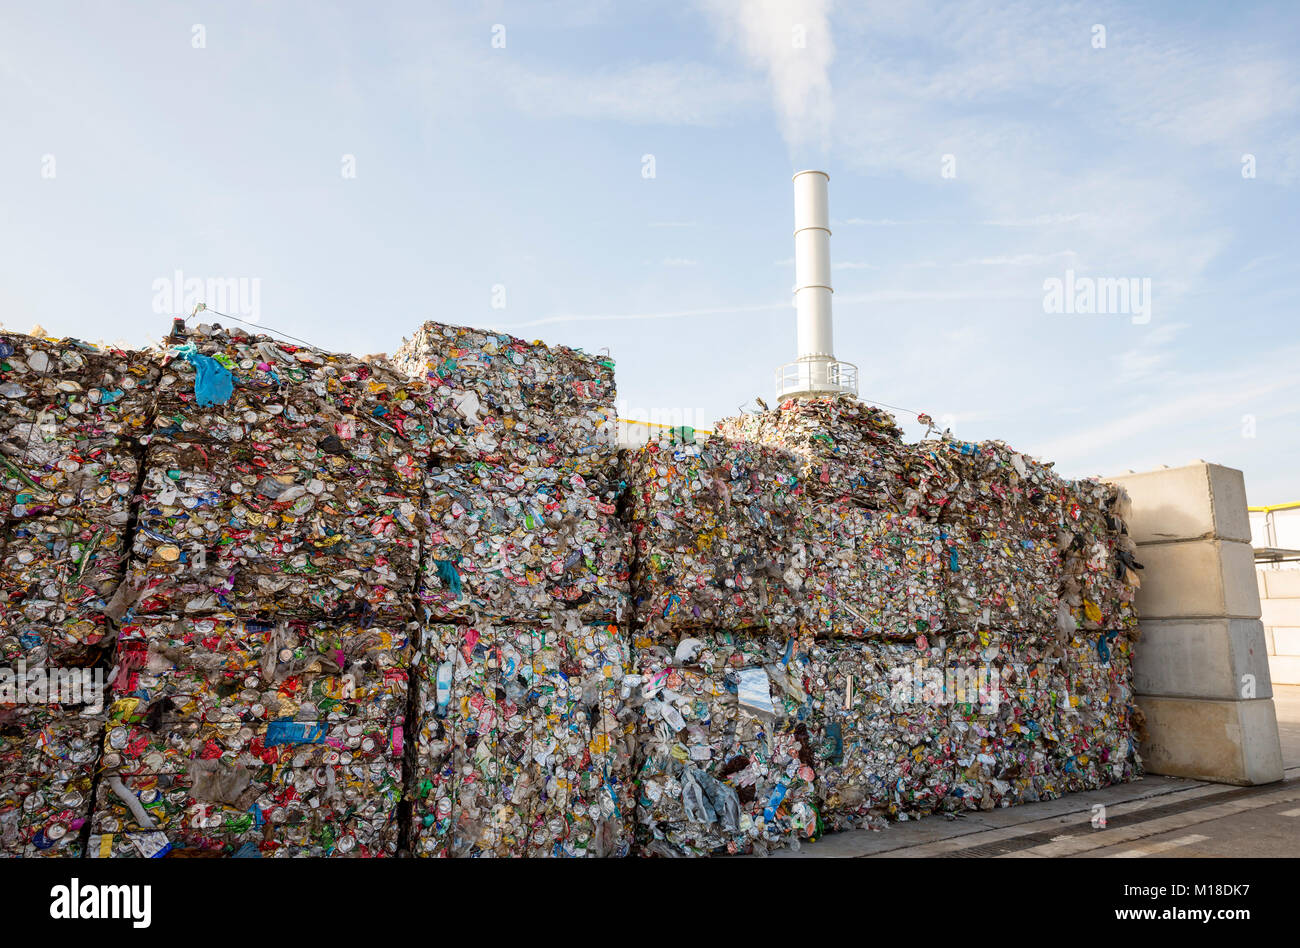 Waste-to-energy or energy-from-waste is the process of generating energy in the form of electricity or heat from the primary treatment of waste. Envir Stock Photo